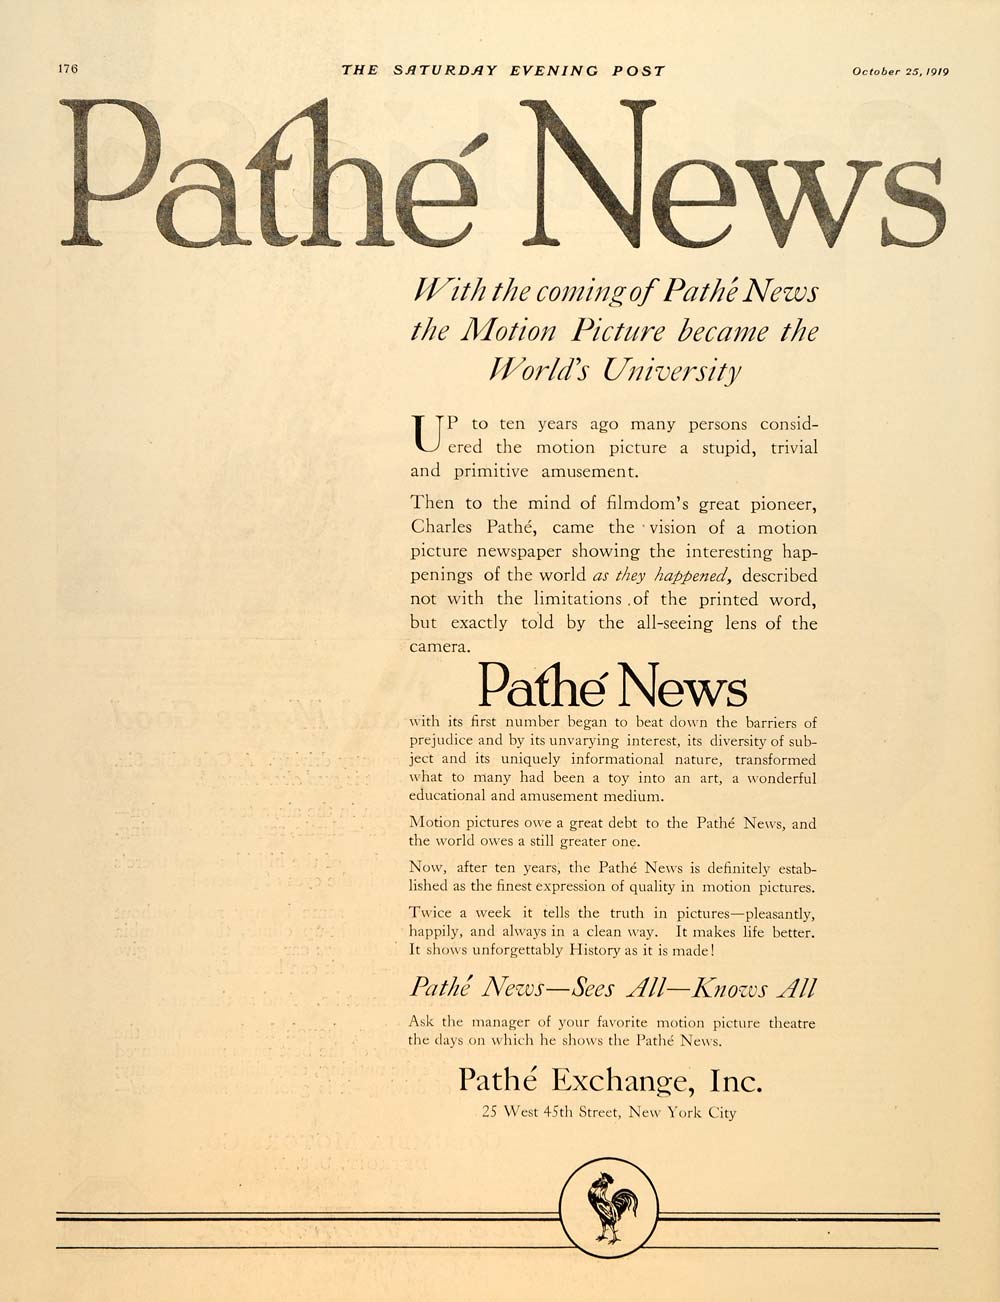 1919 Ad Charles Pathe News Motion Picture Newspaper - ORIGINAL ADVERTISING SEP4